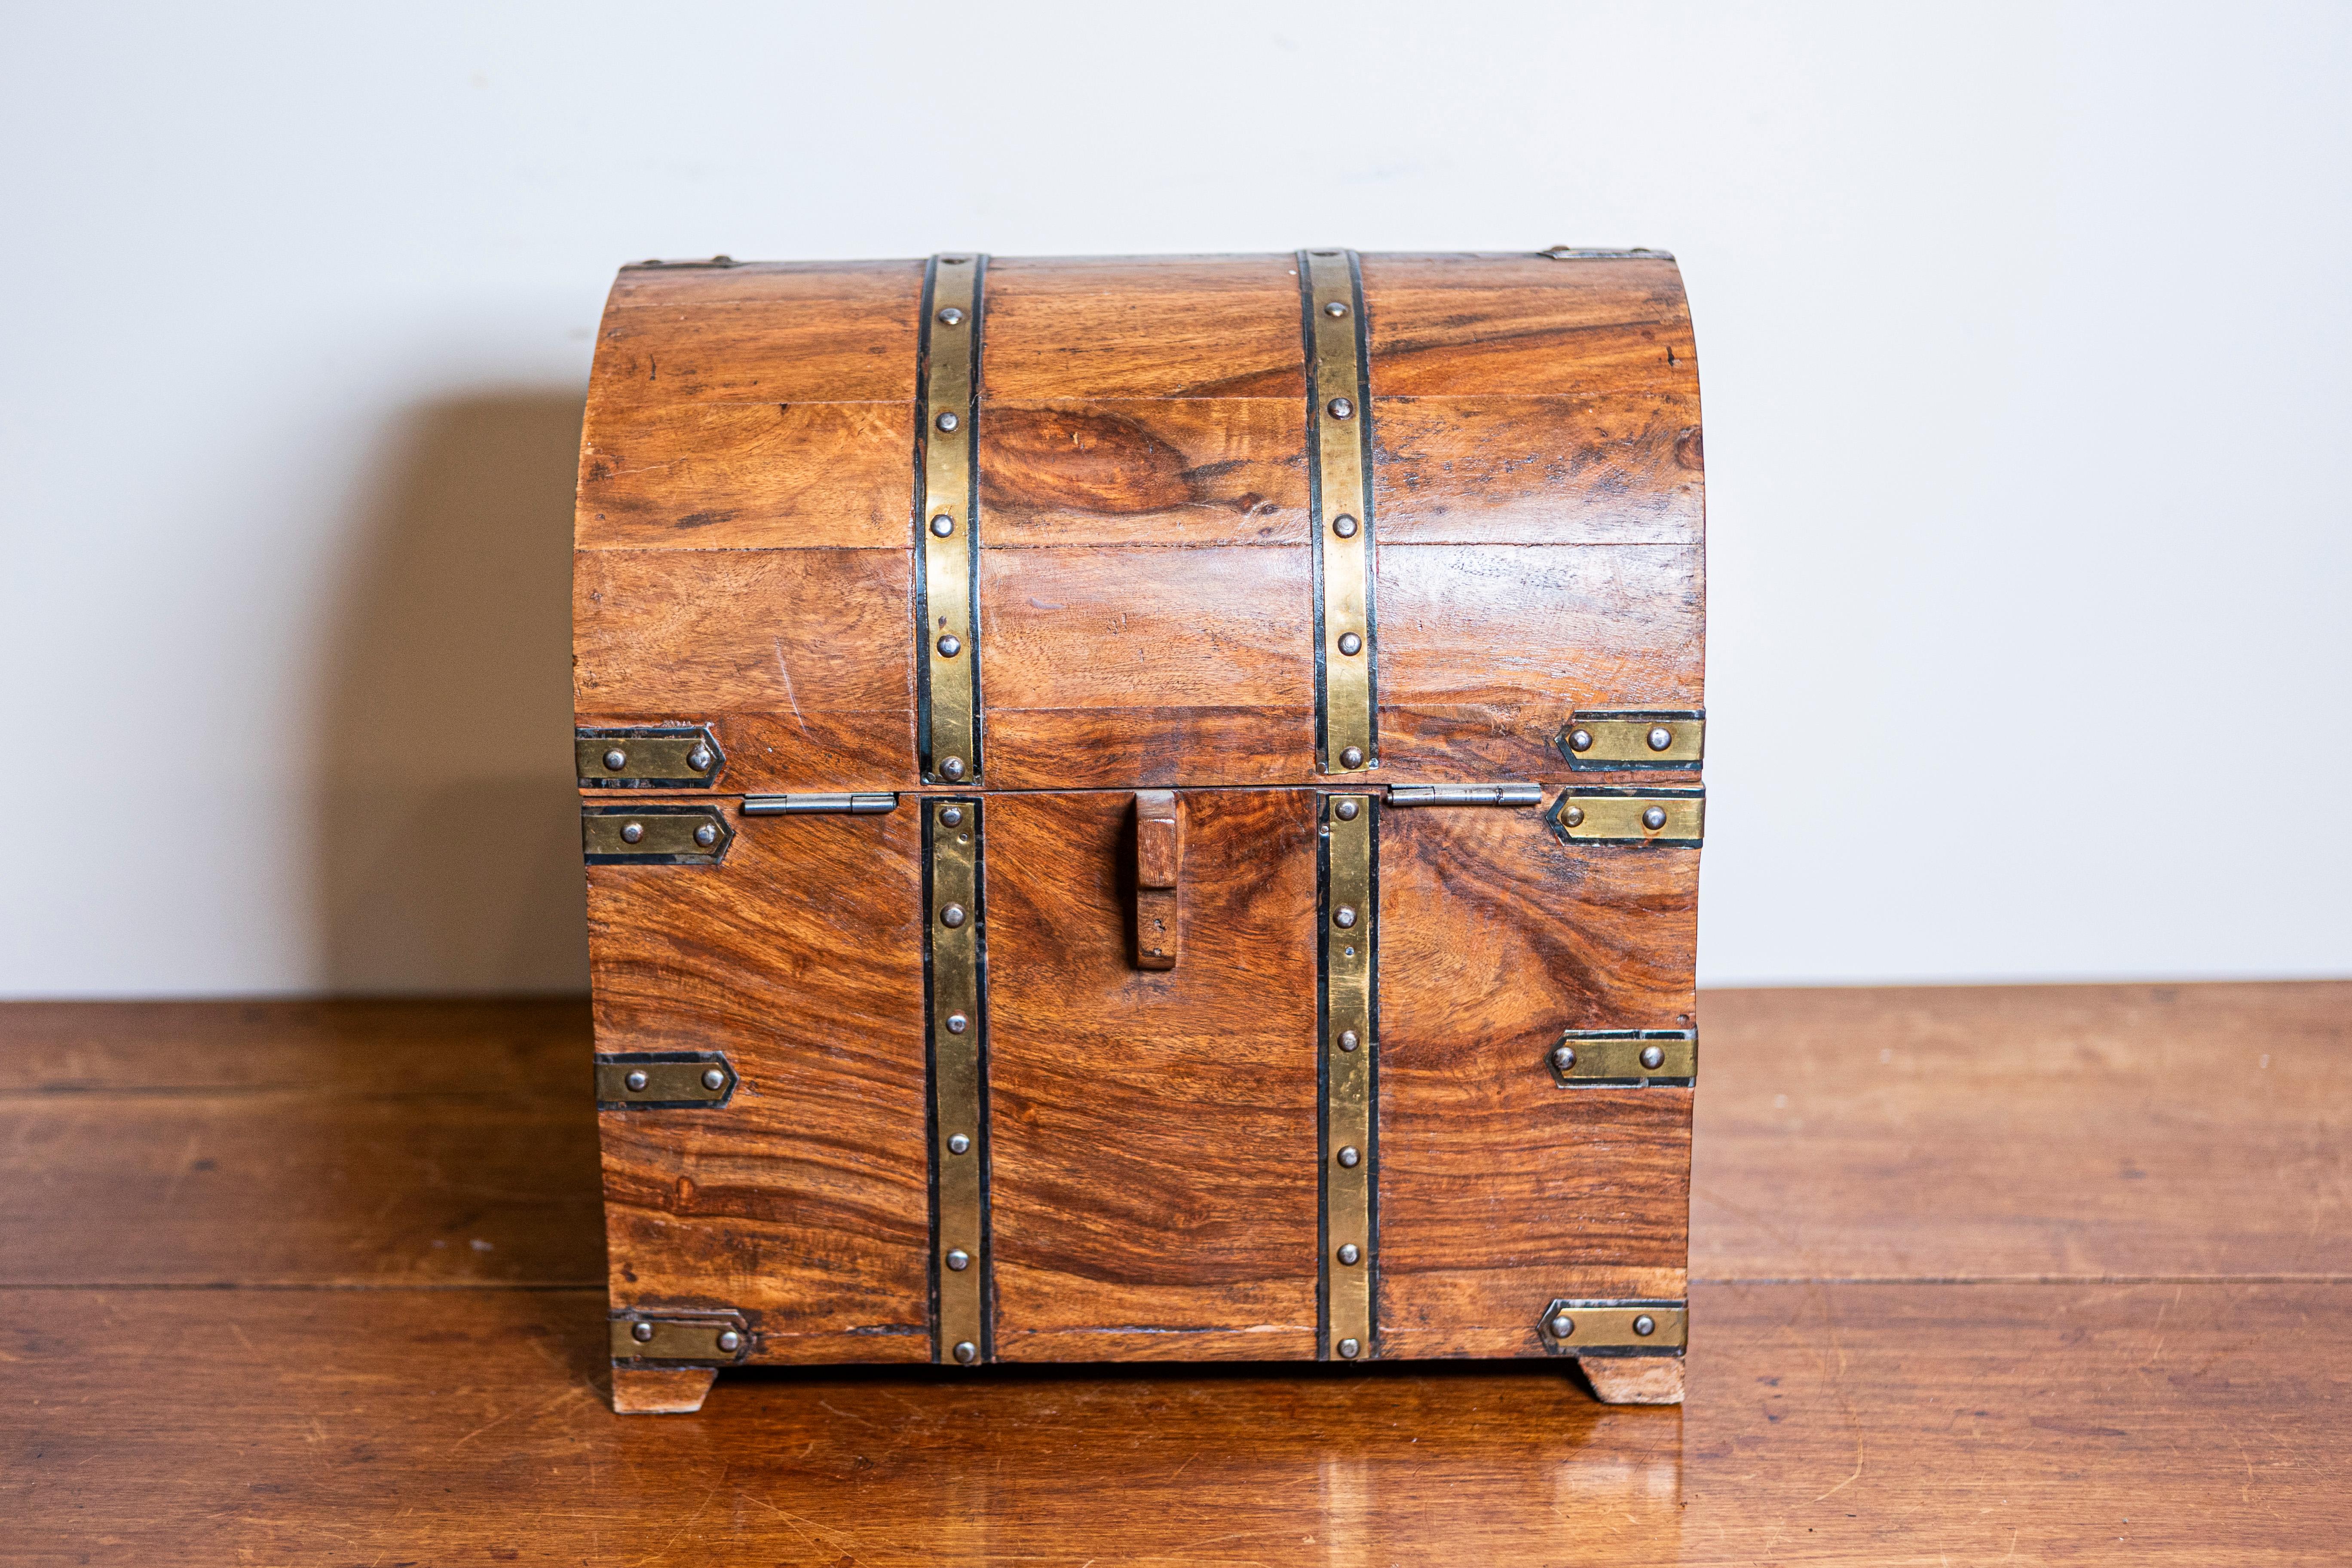 English Vintage Wooden Treasure Chest Shaped Cellarette with Brass Details For Sale 2